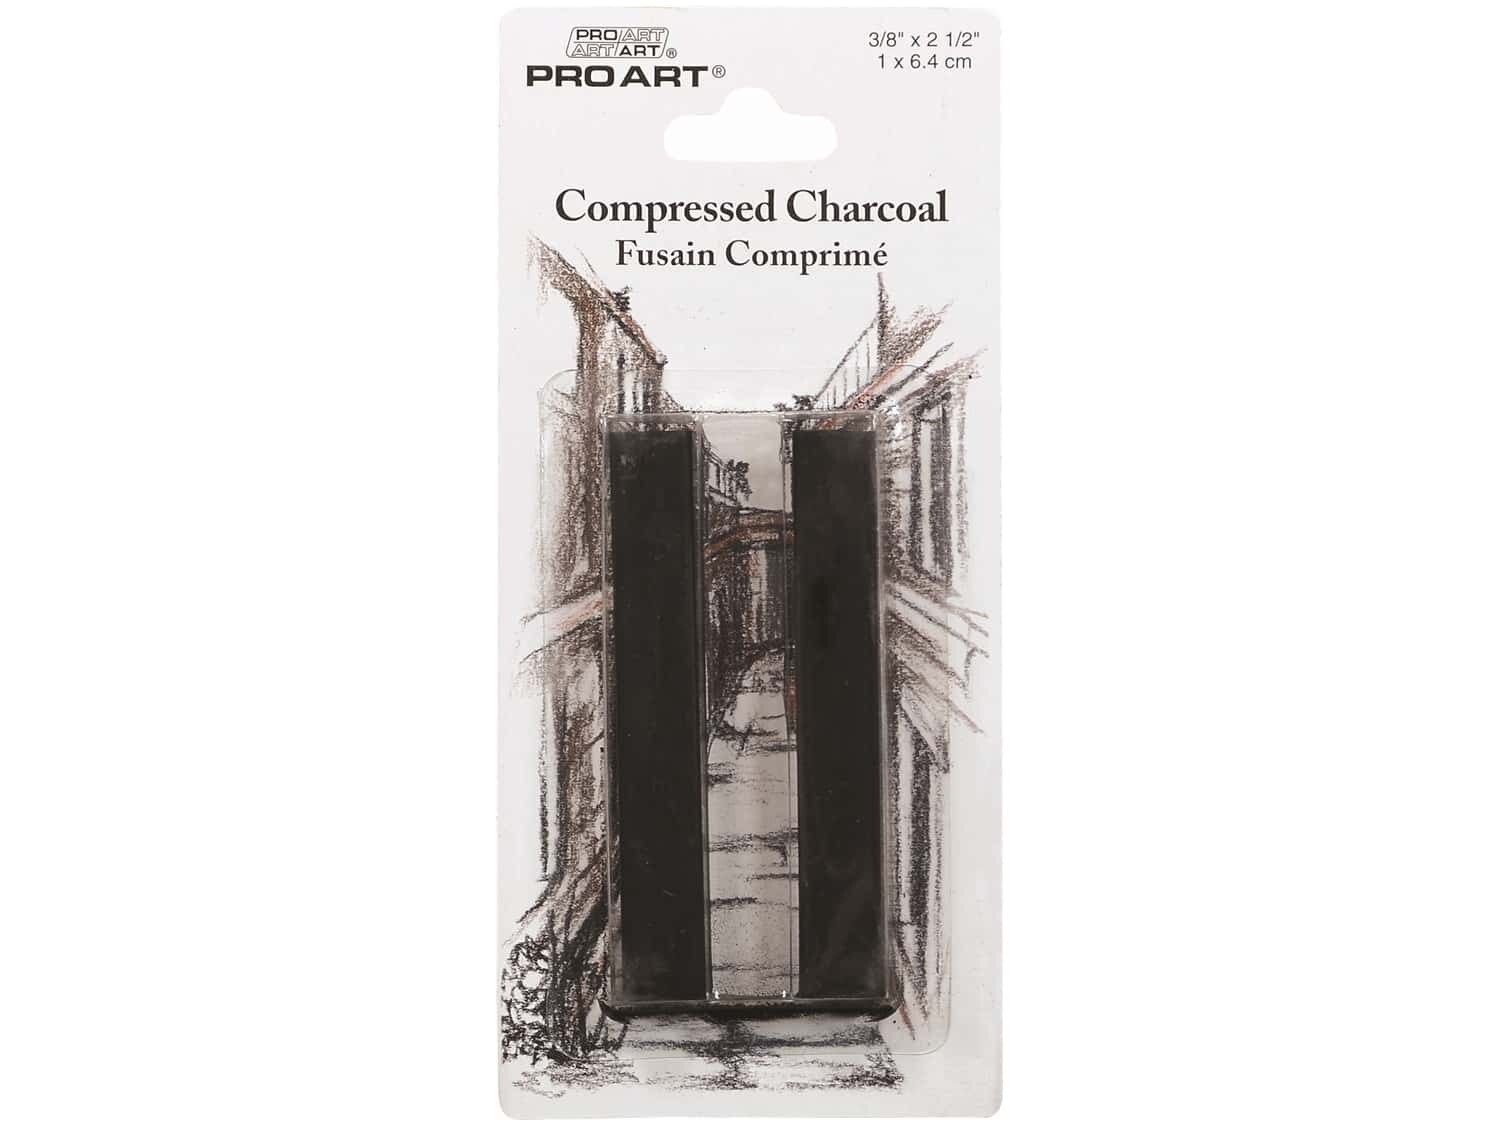 Pro Art Compressed Charcoal